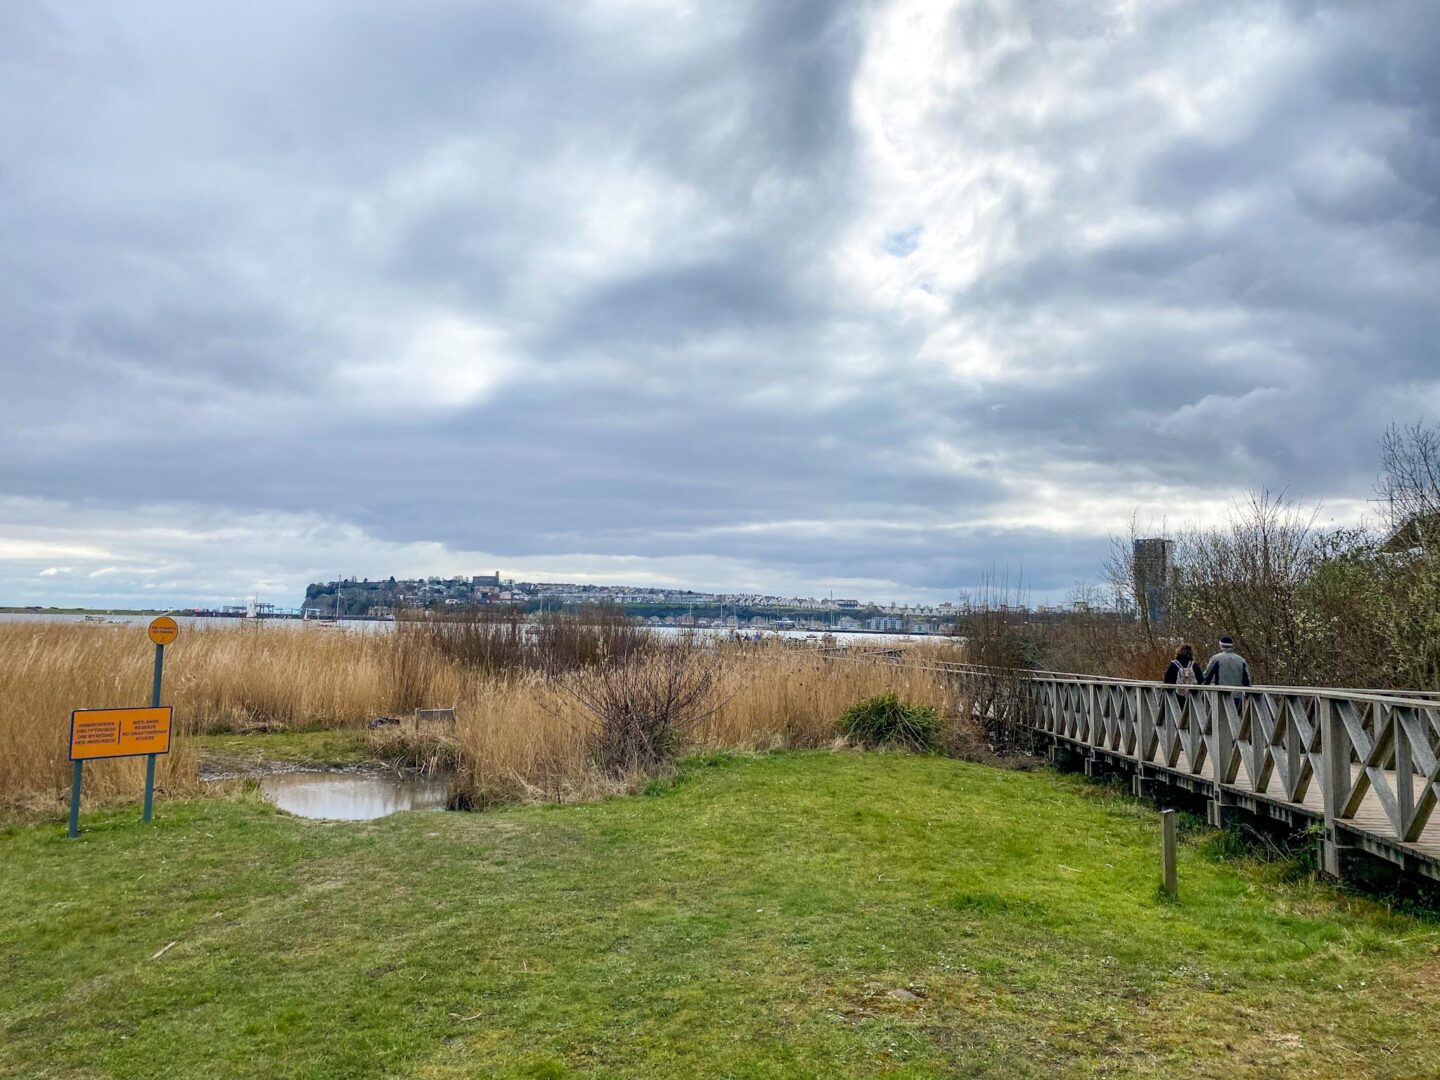 One day in Cardiff, Cardiff Bay Wetlands Reserve Boardwalk view